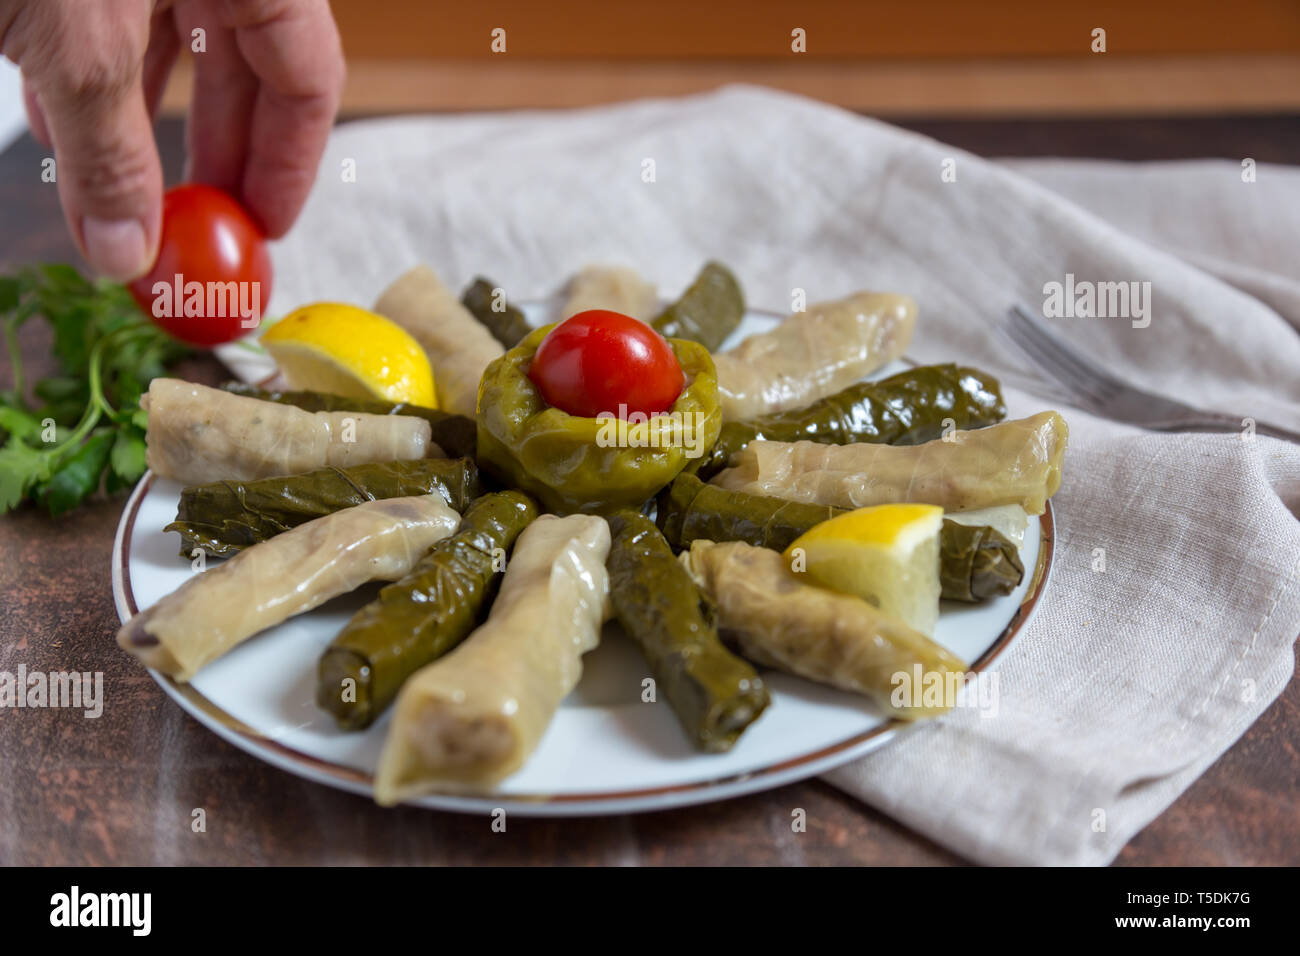 traditional turkish food with olive oil leaves, cabbage and stuffed peppers Stock Photo